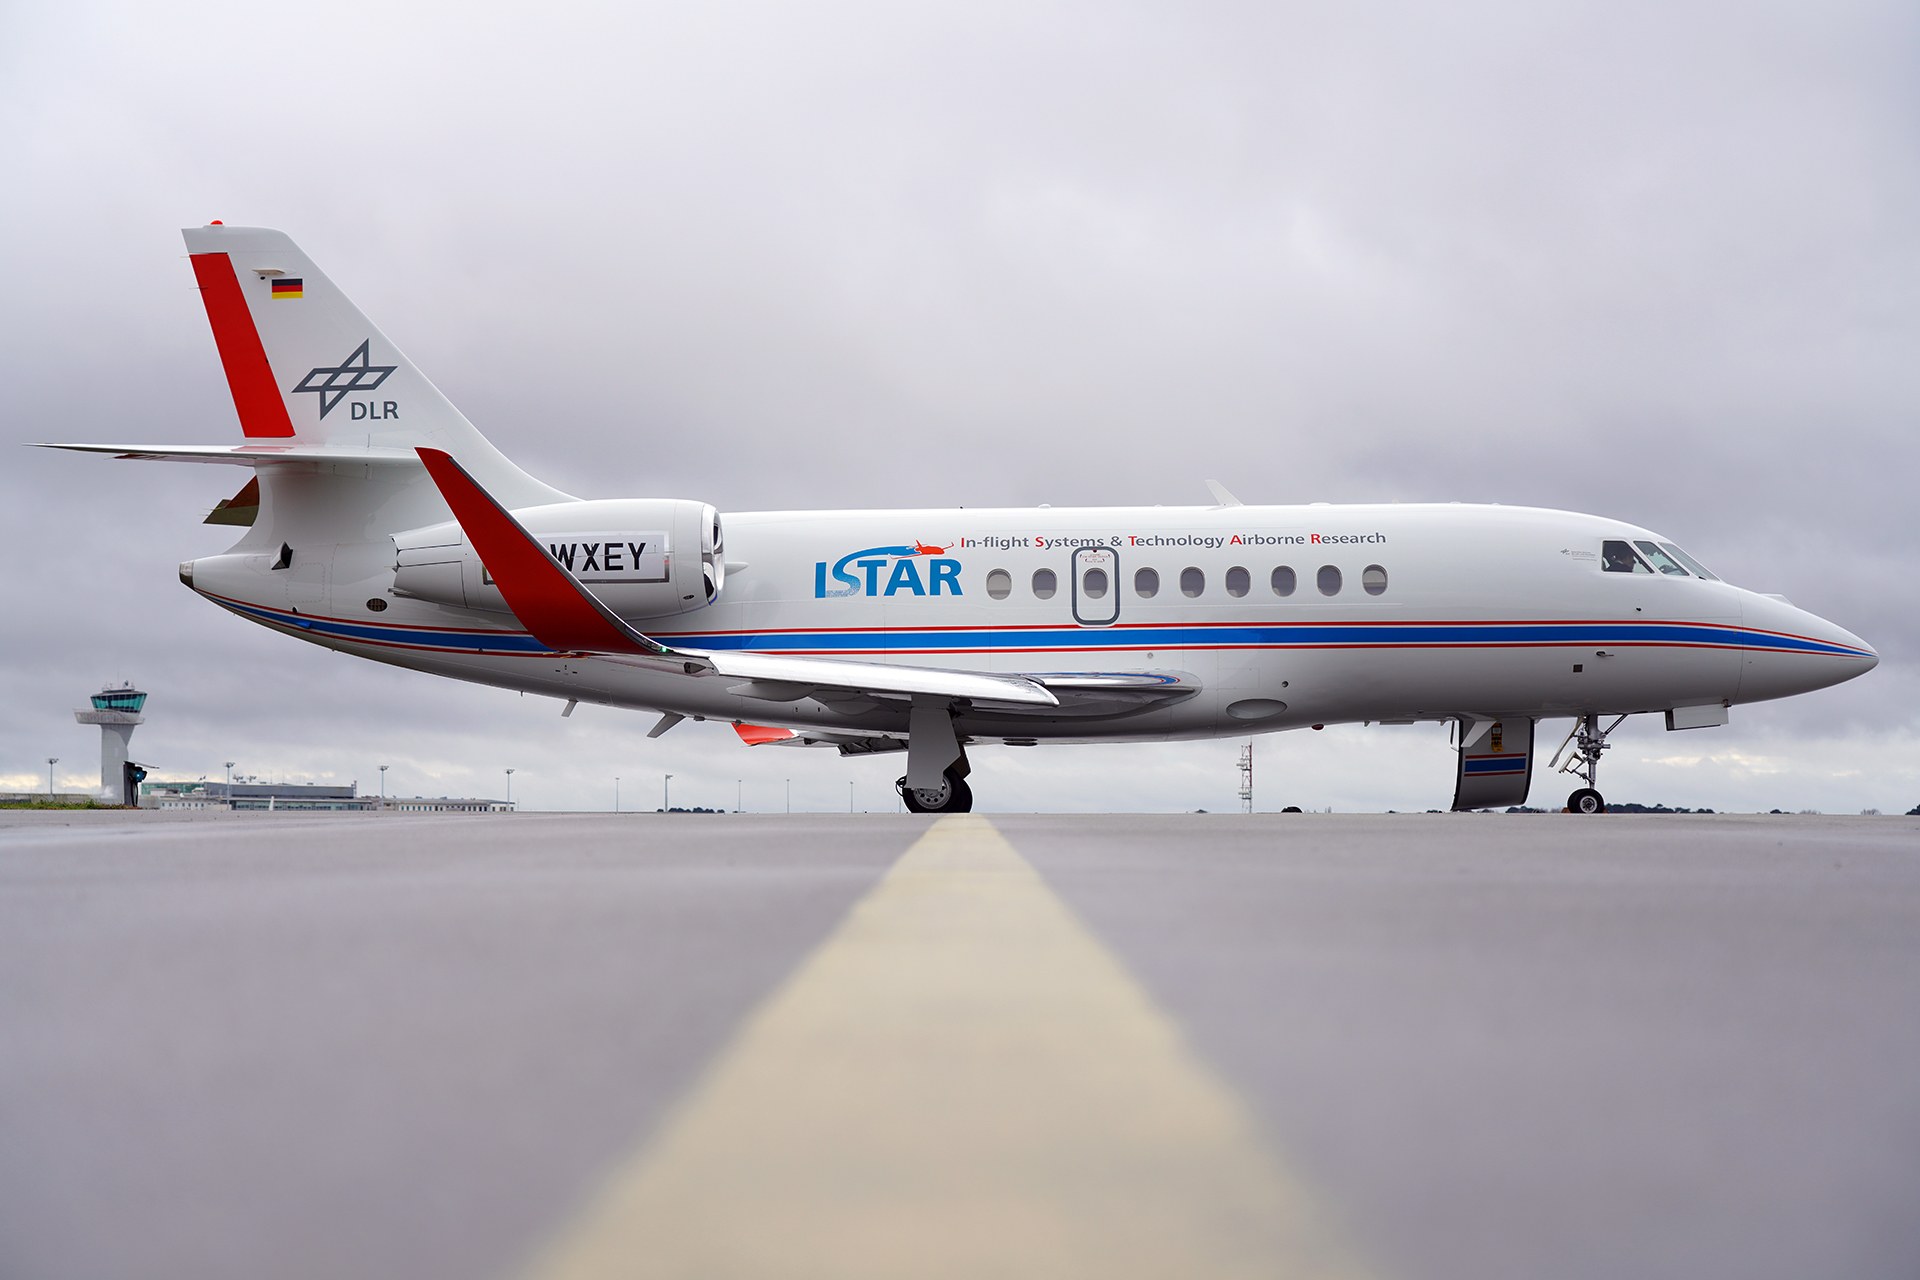 Arrival of the new DLR research aircraft ISTAR in Braunschweig